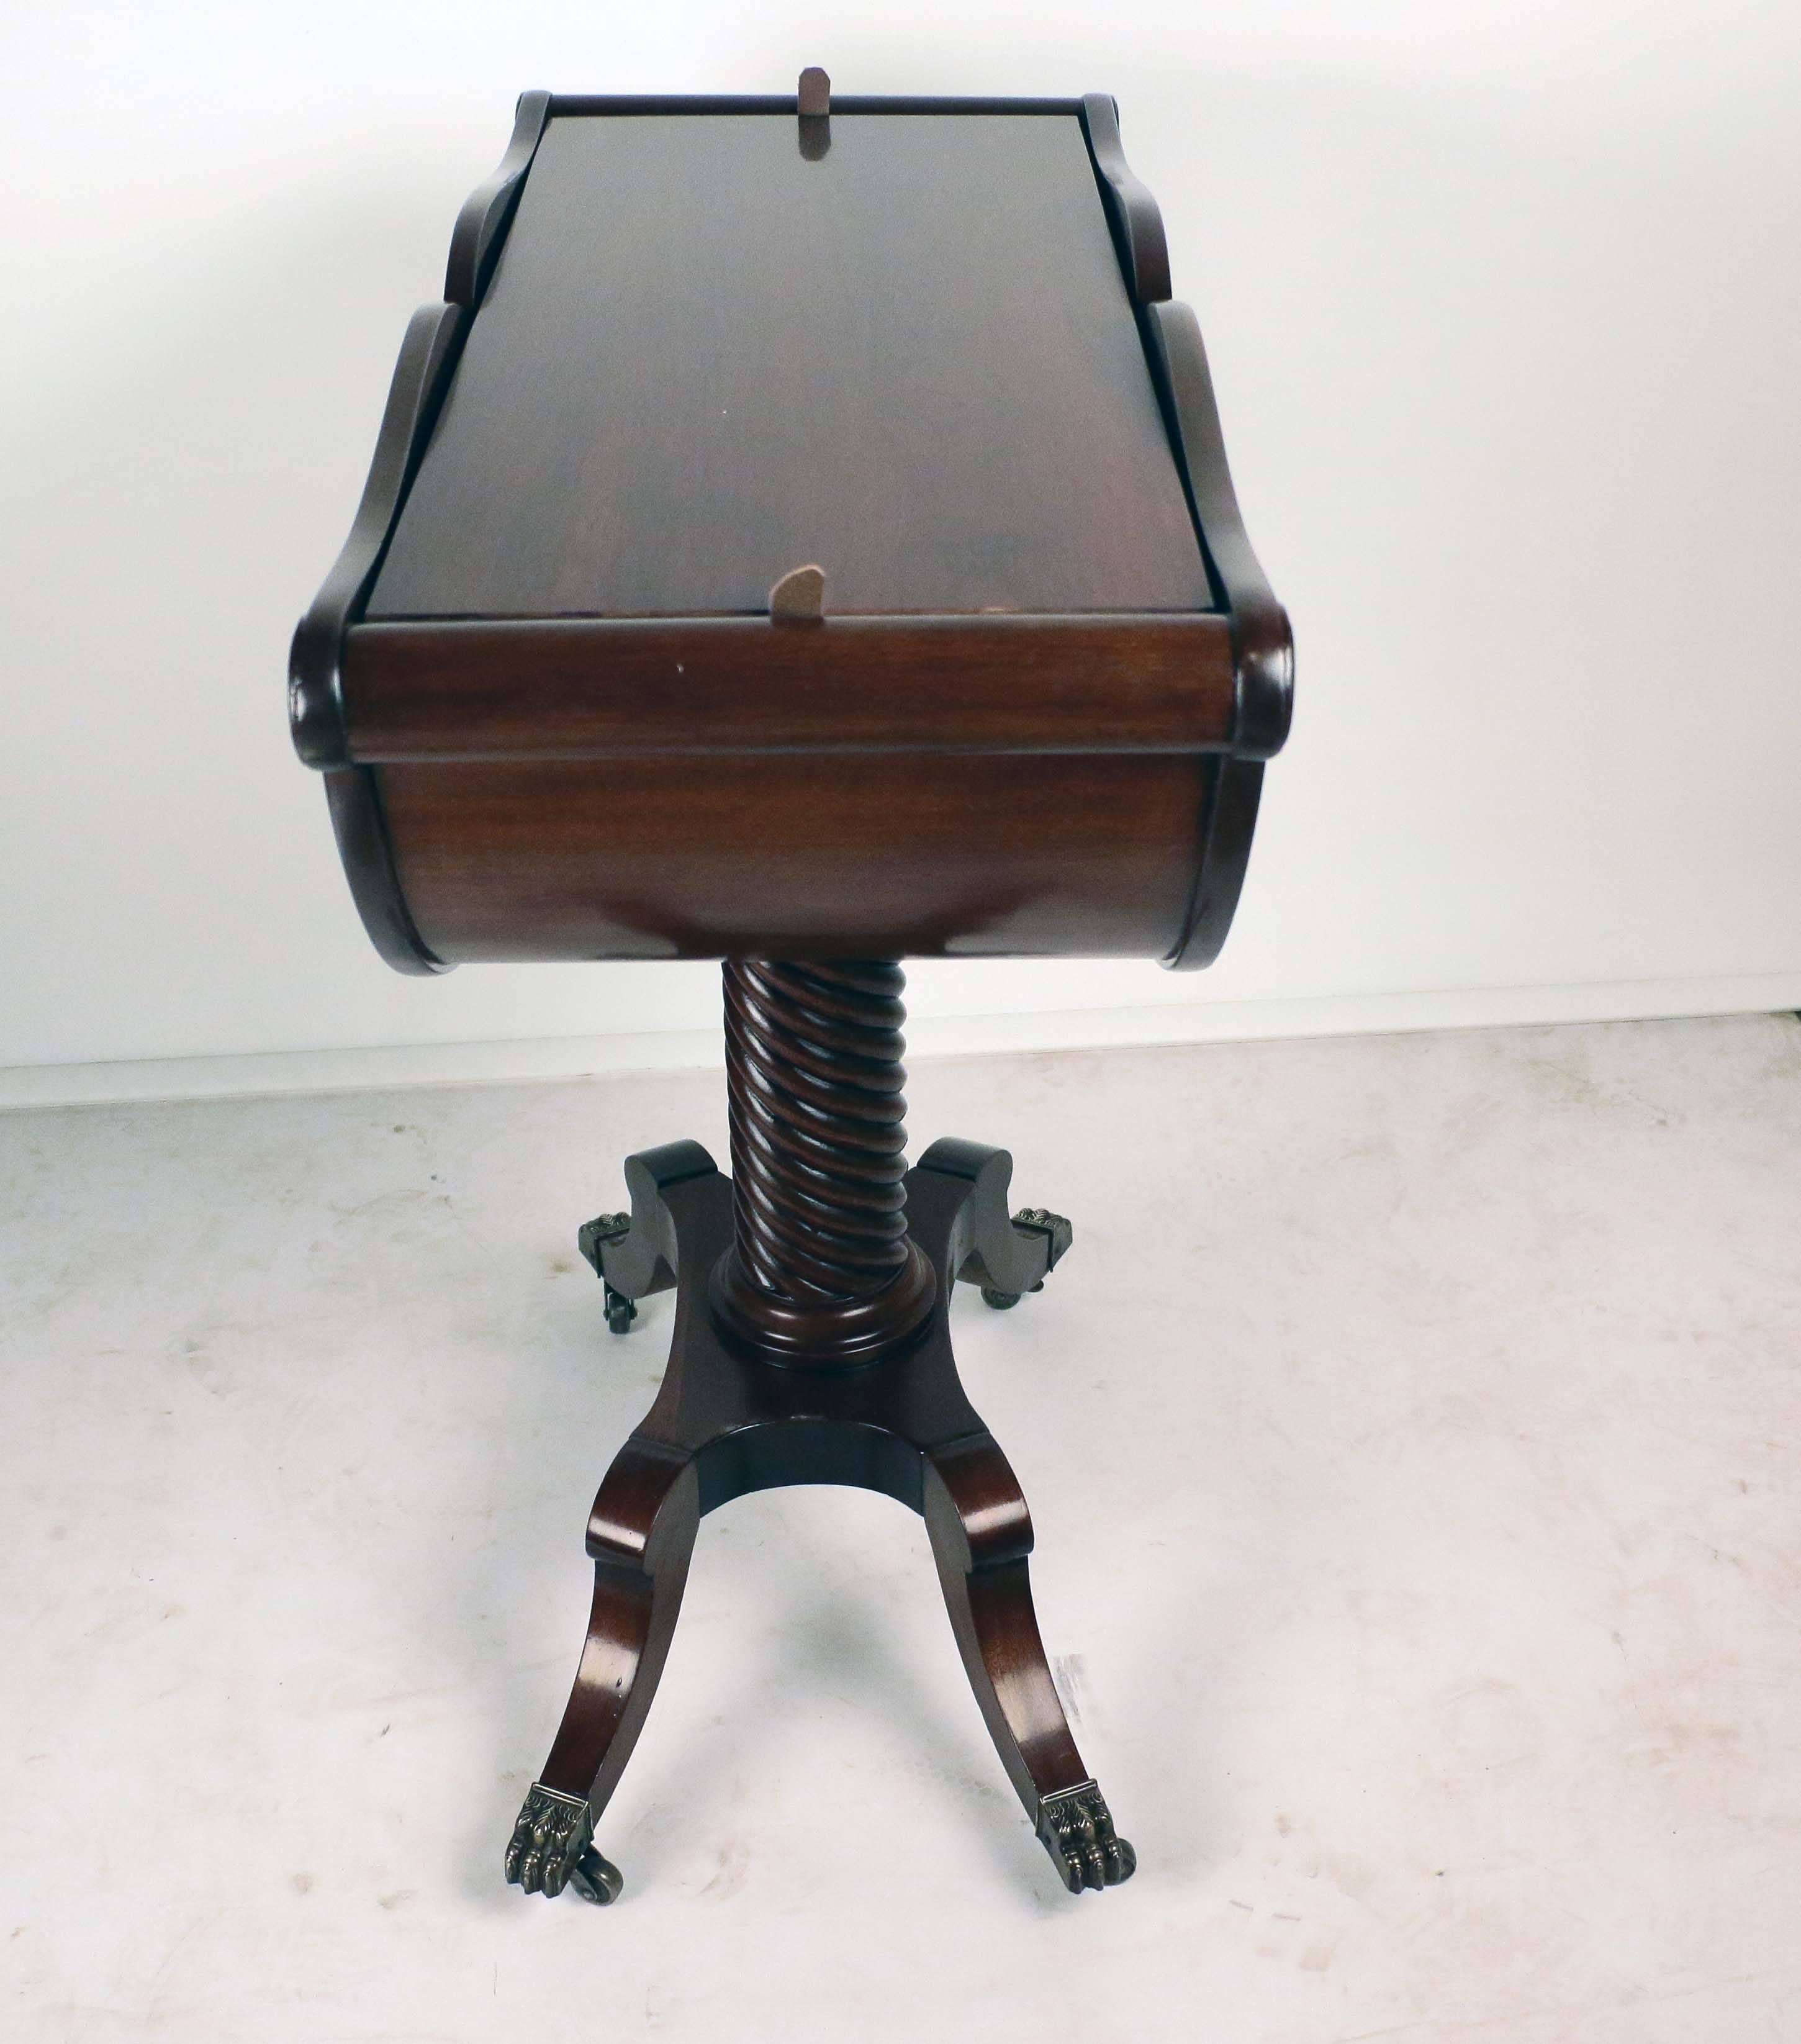 A unusual shaped Georgian mahogany work table with lift top, a serpentine upper edge with demilune shaped body supported by a barley twist centre column on a quatrafoil base and legs ending in a brass lion foot casters.
This table is shaped like a